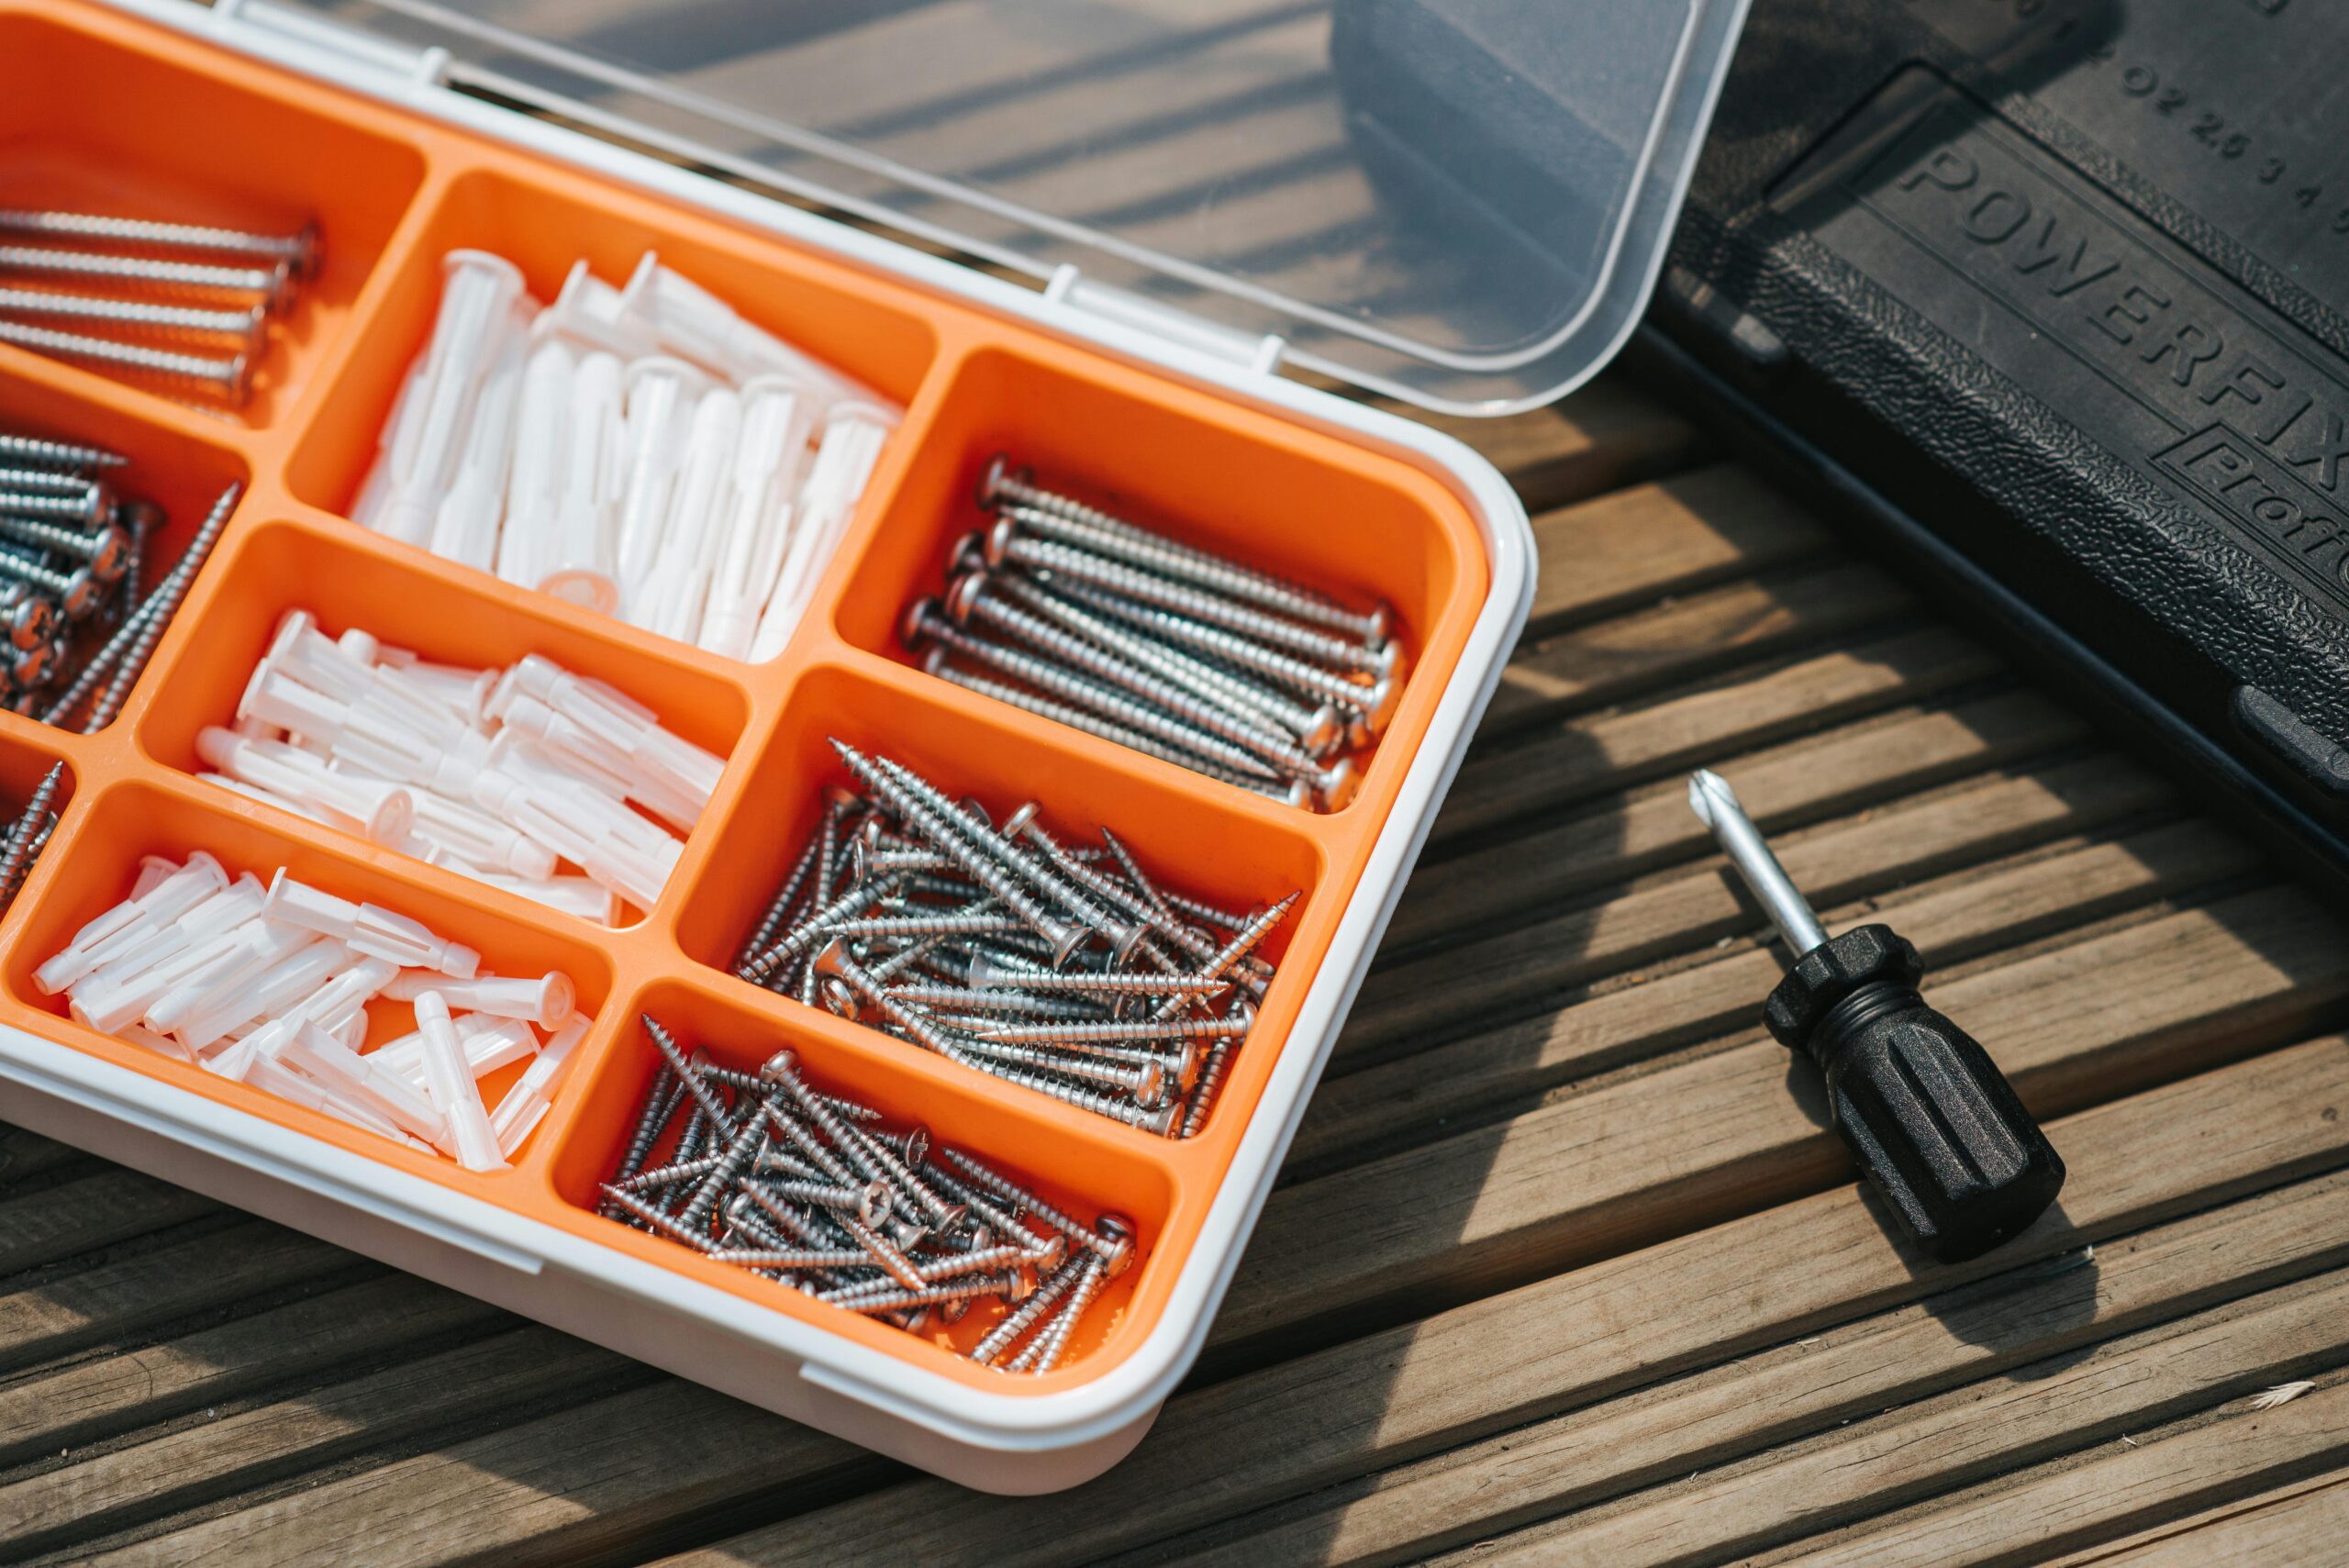 A toolkit filled with multiple screws